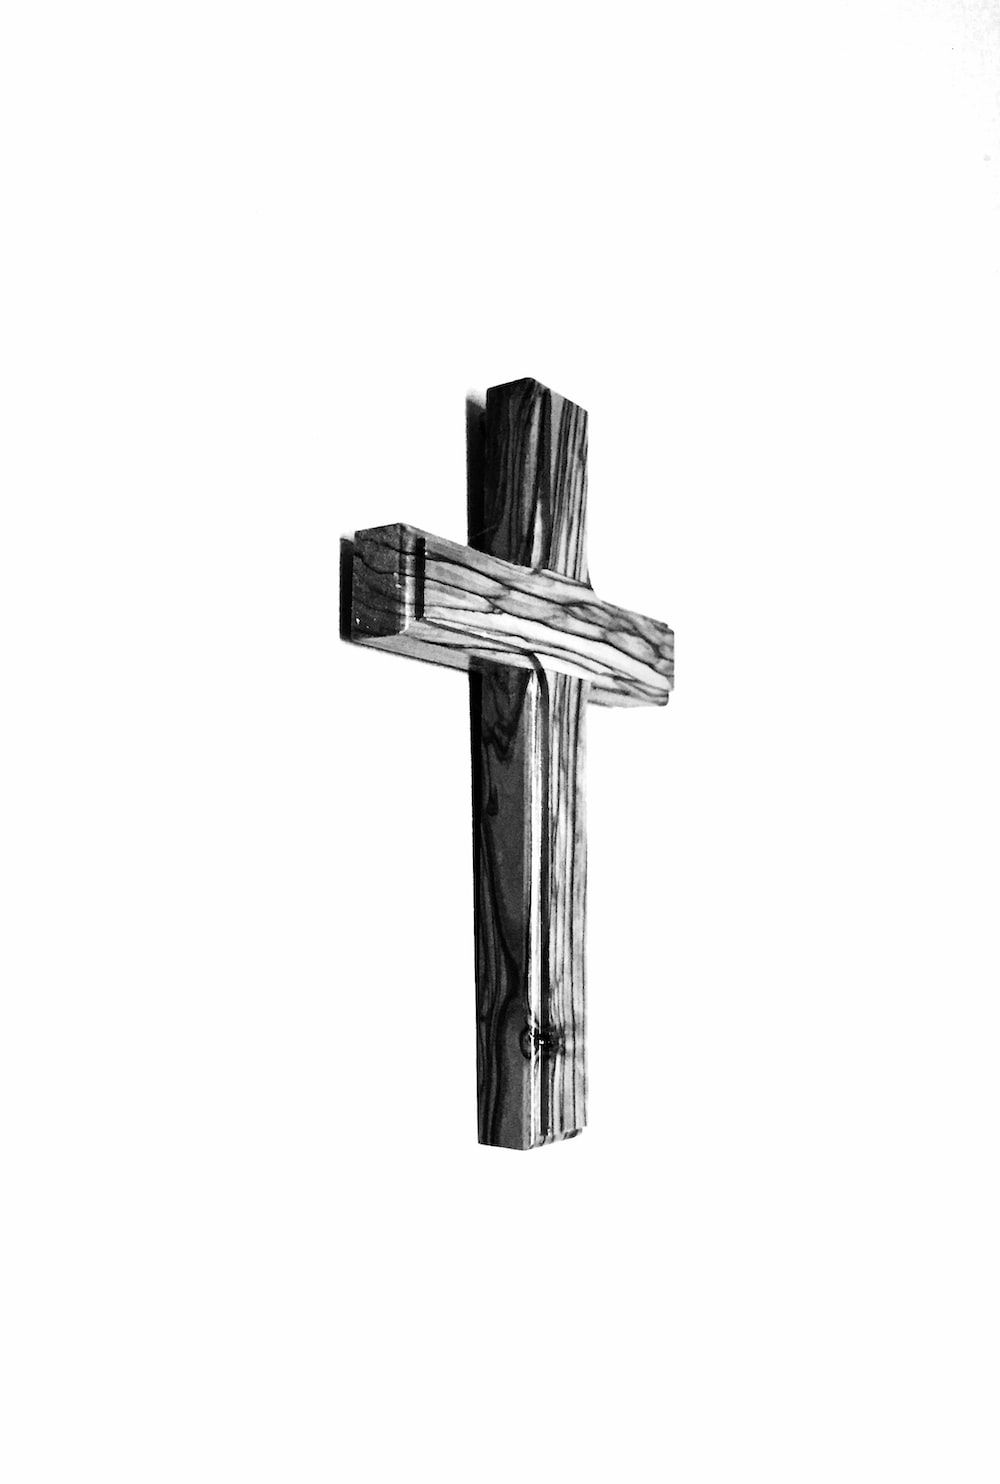 Wooden Cross Picture. Download Free Image